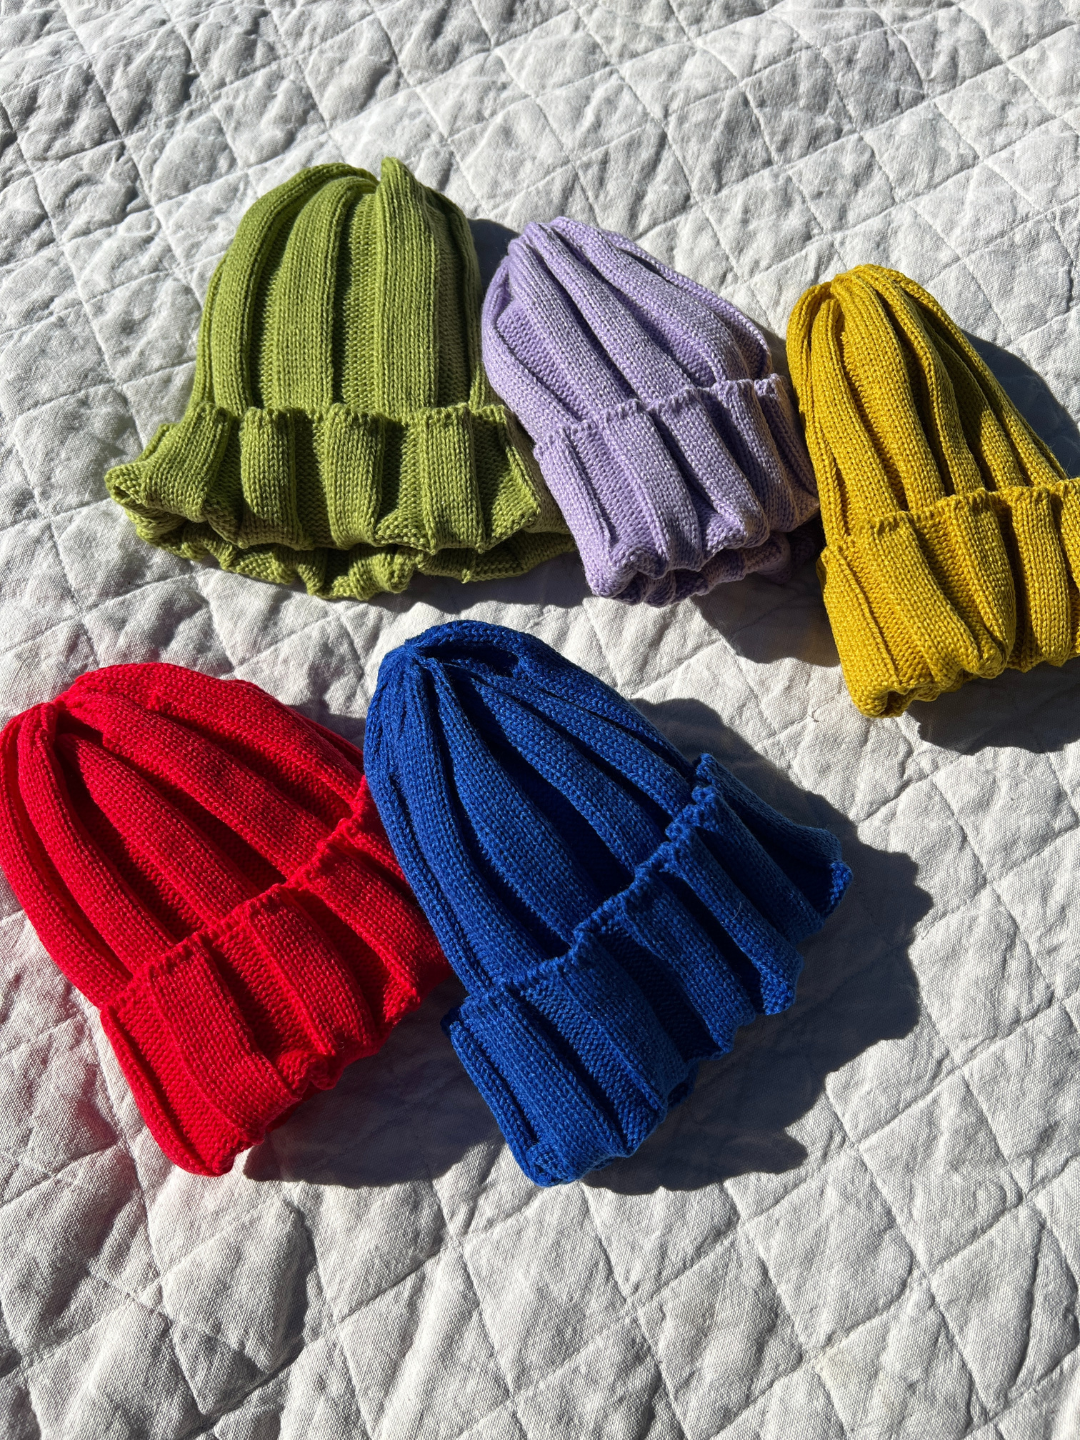 A selection of kids' knitted beanies laid on a quilt; green, lilac, mustard, red and blue